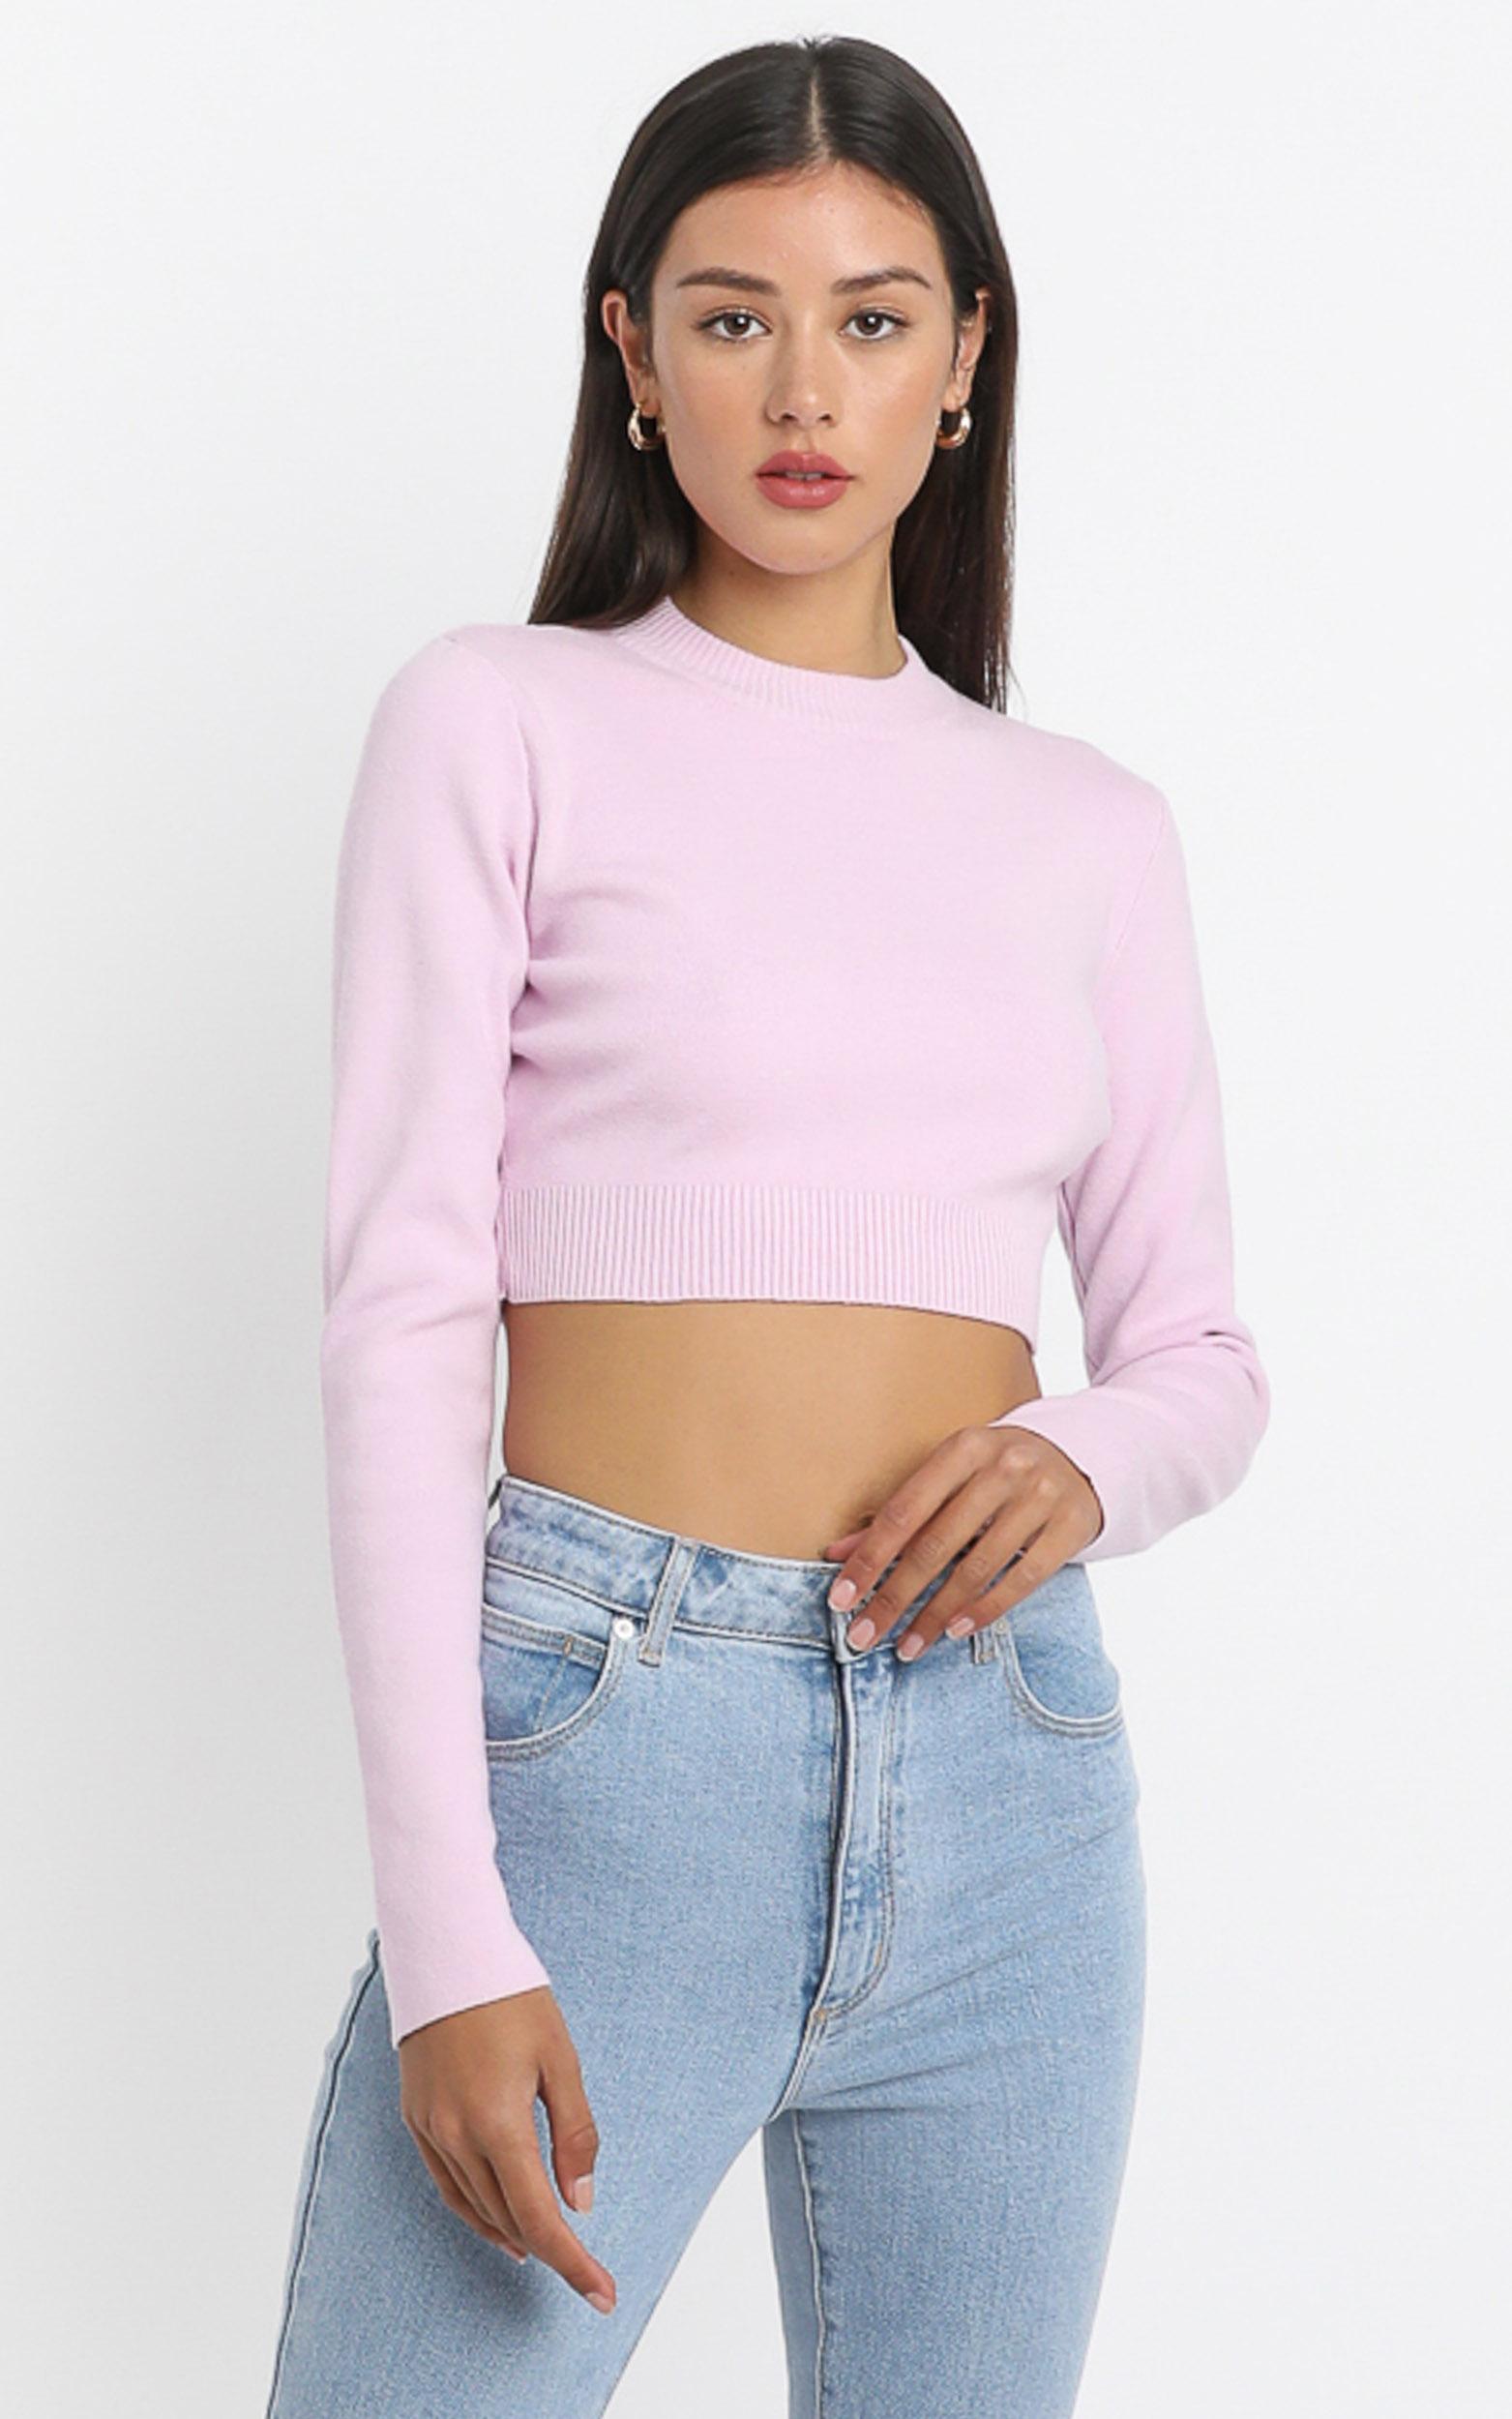 Model Off Duty Knit Top in Pink - 08, PNK1, hi-res image number null